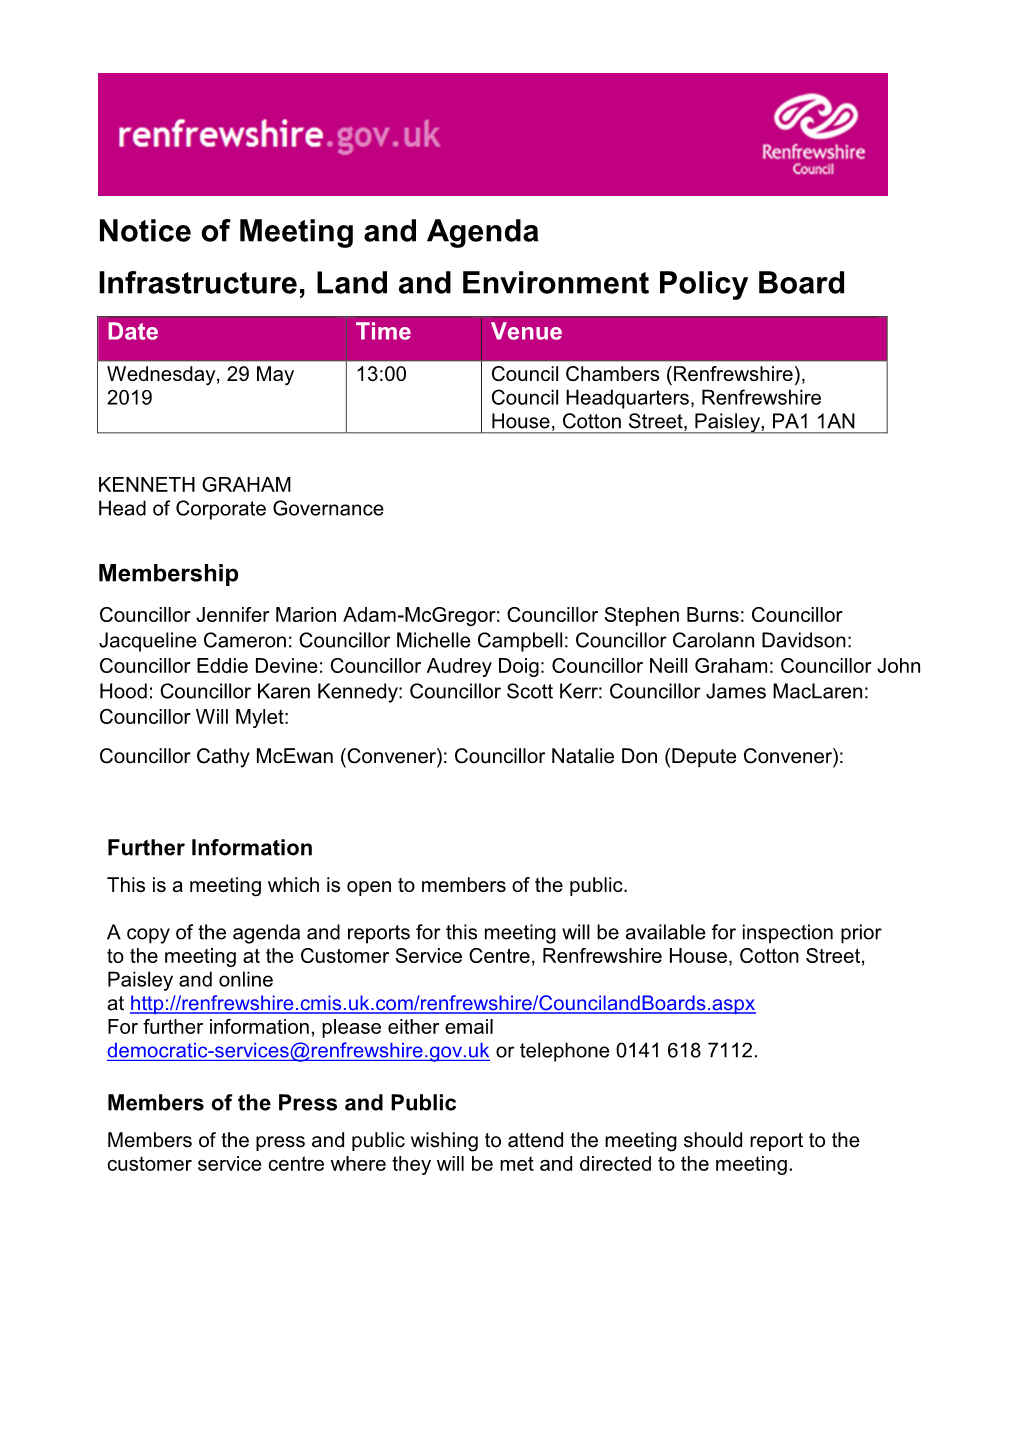 Notice of Meeting and Agenda Infrastructure, Land And